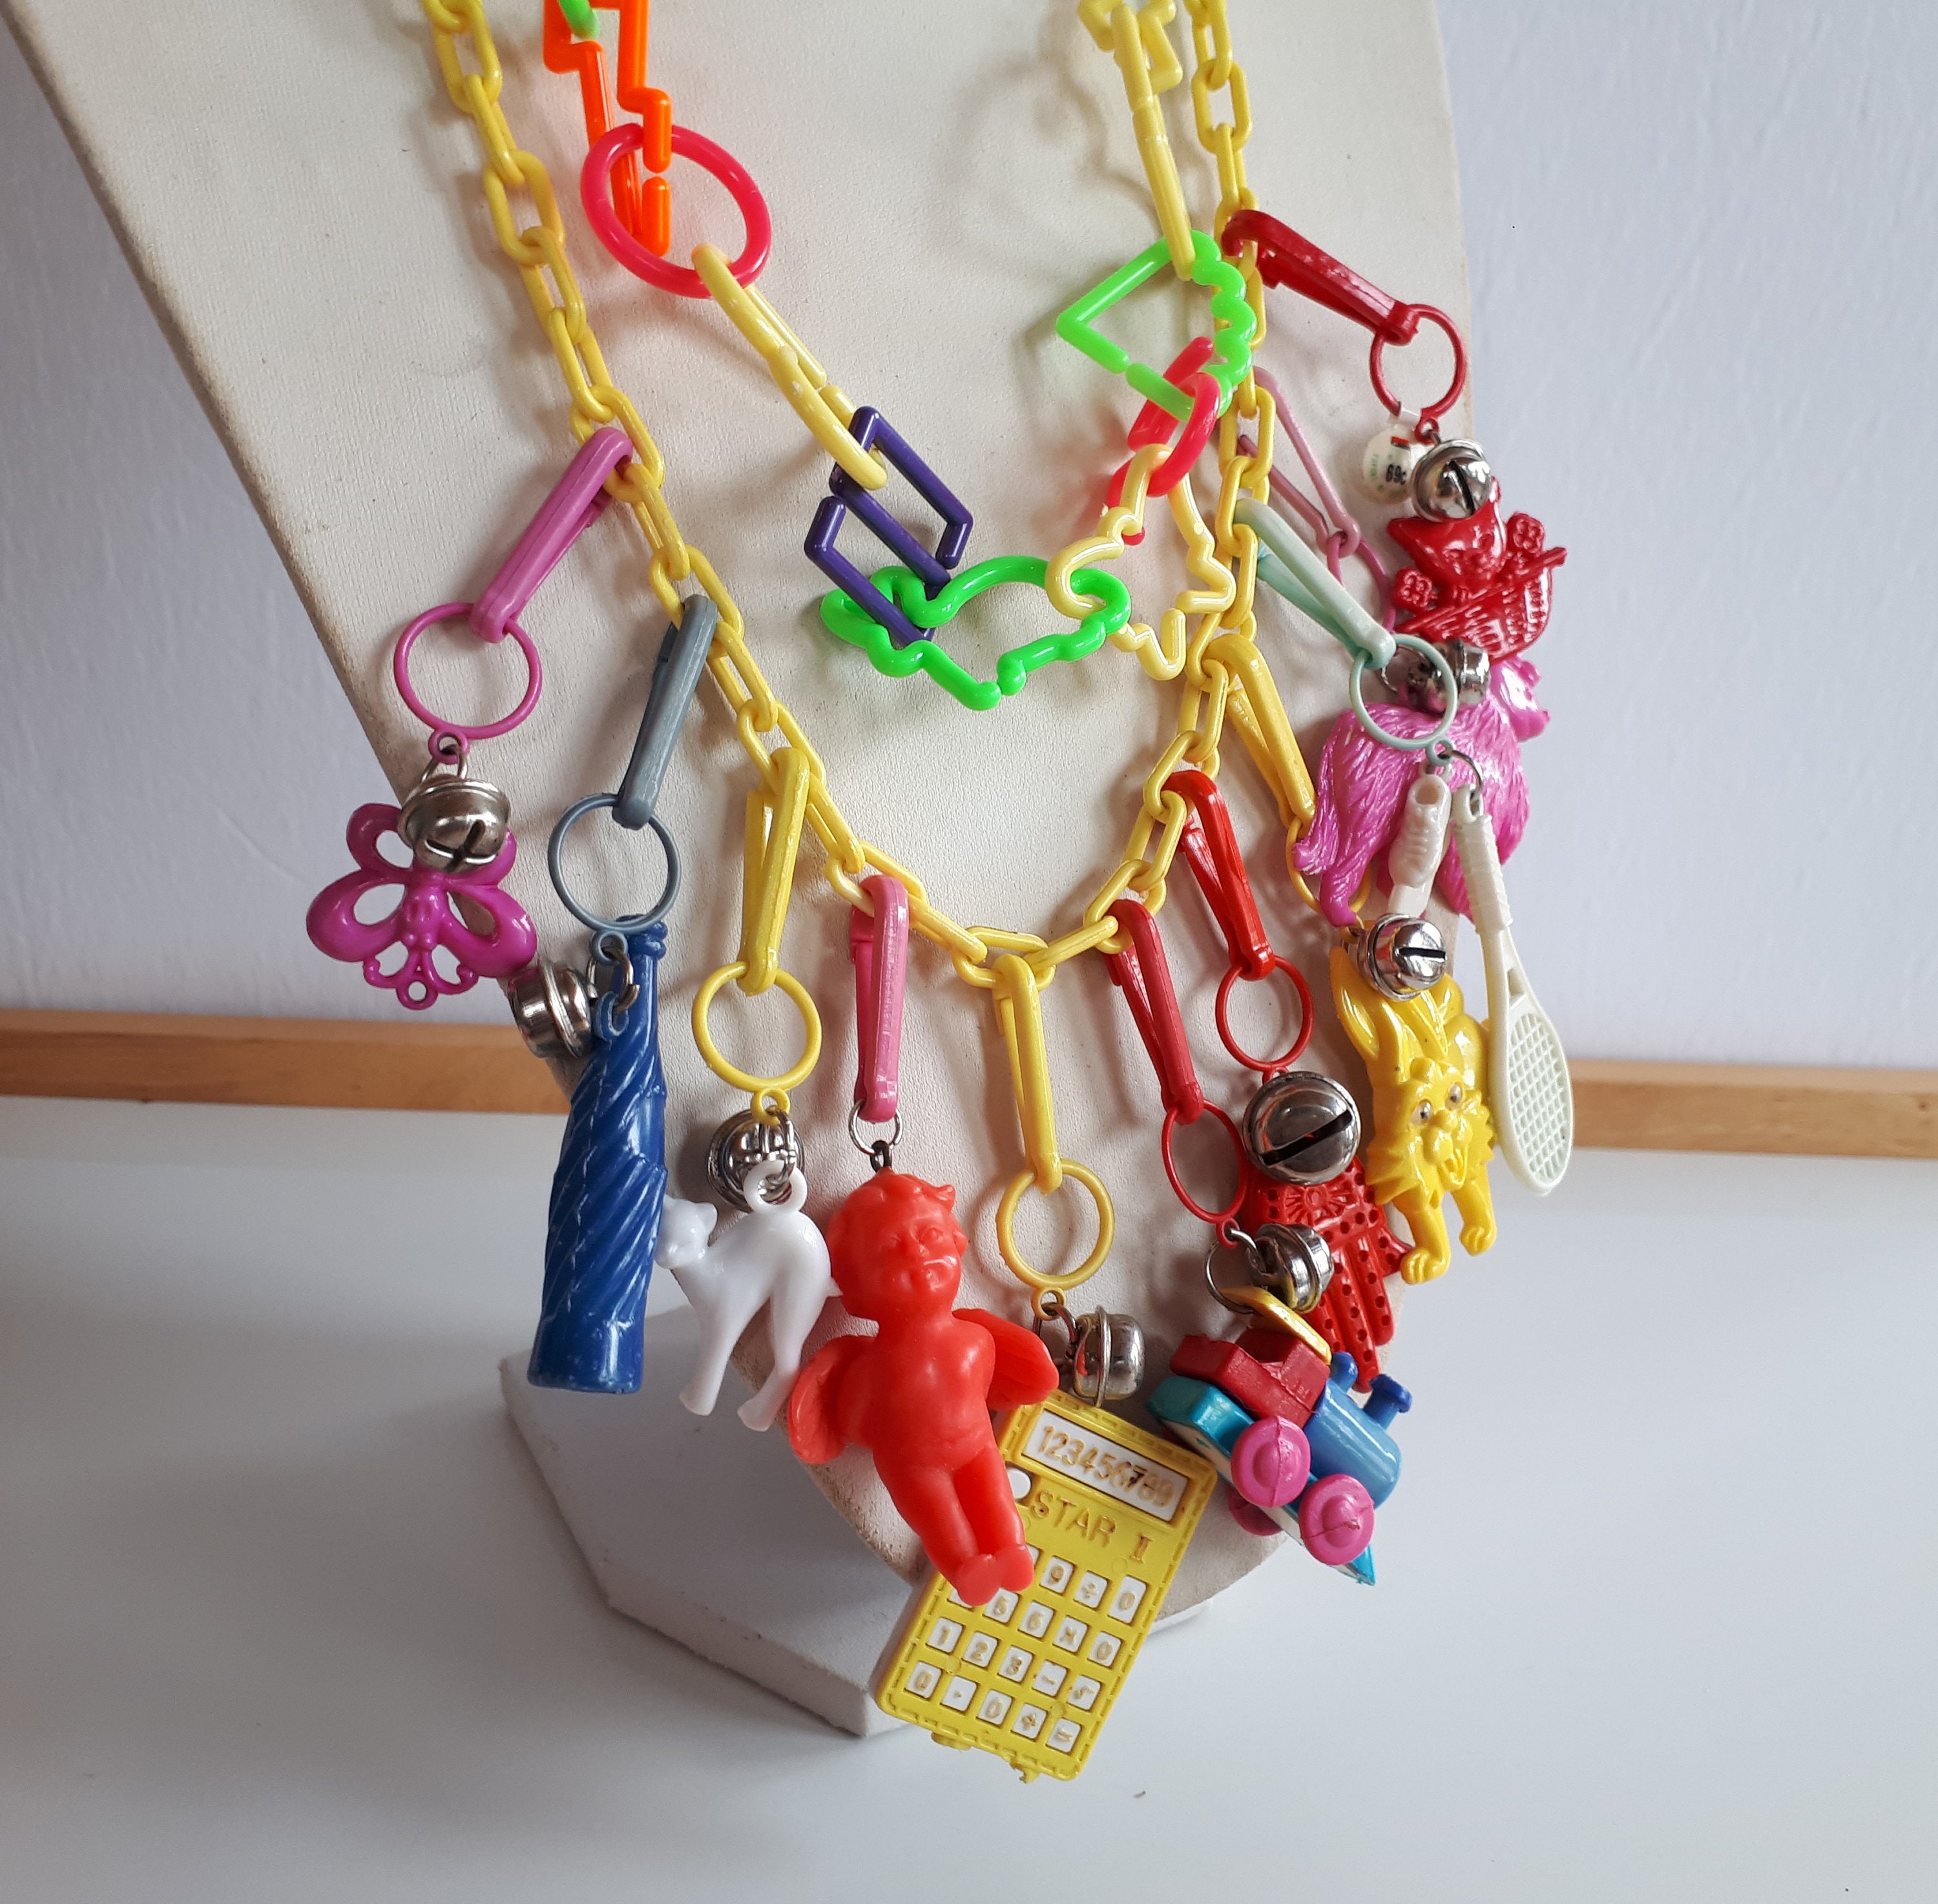 Plastic Charm Necklace from the 80's – Ruth E. Hendricks Photography